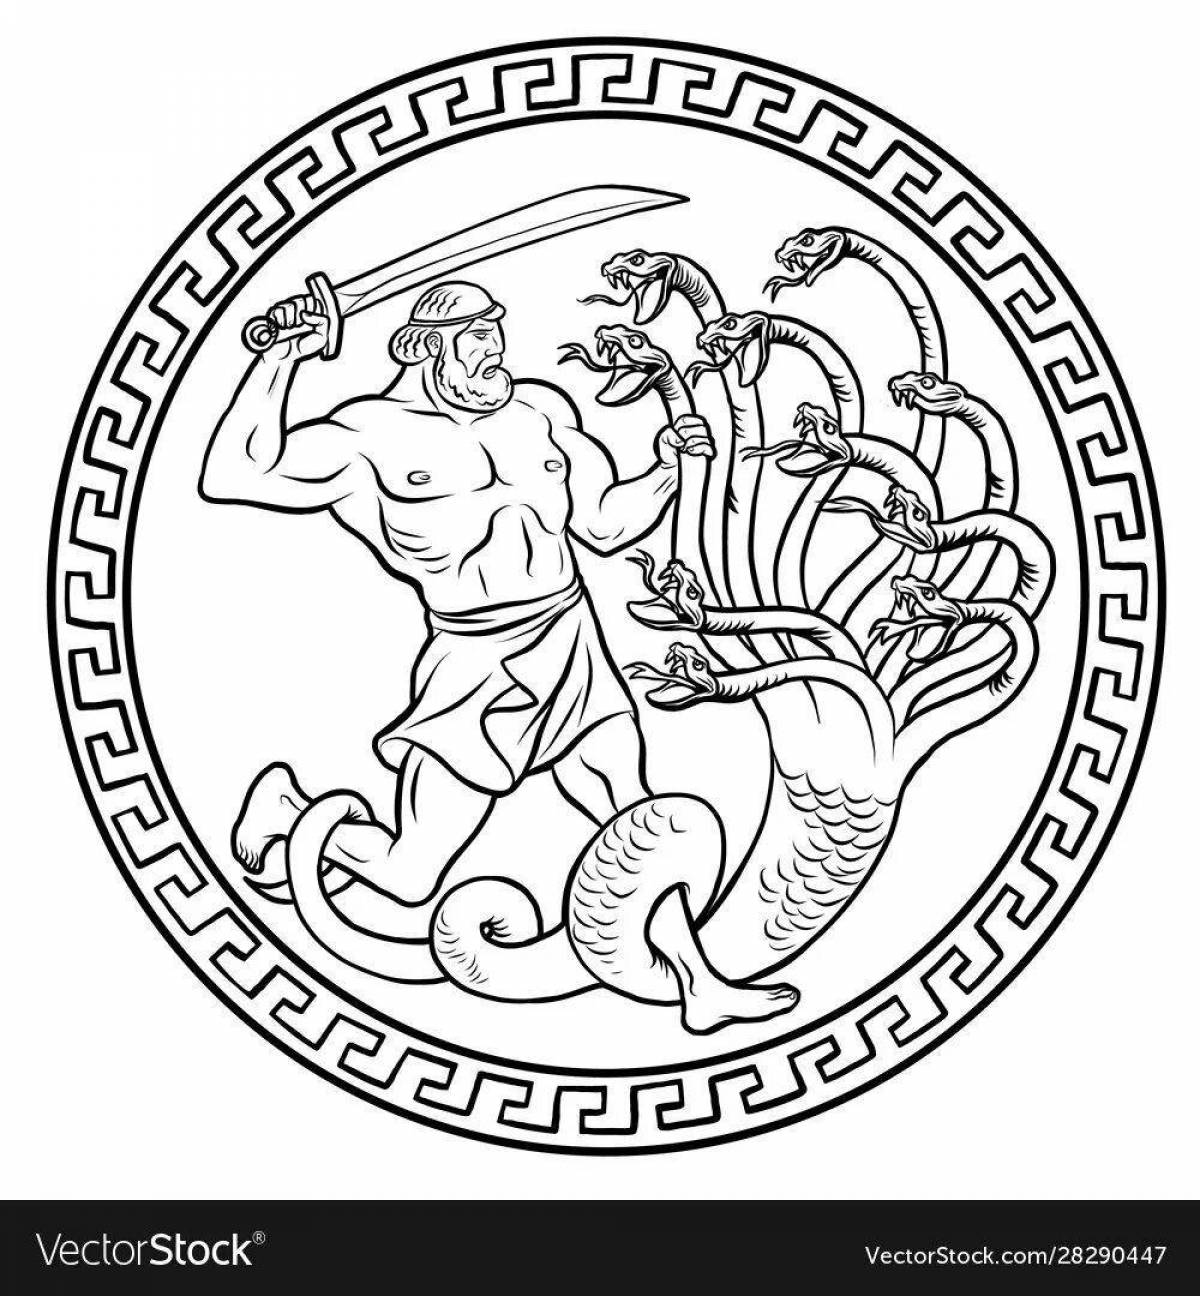 Richly colored 12 labors of hercules coloring page